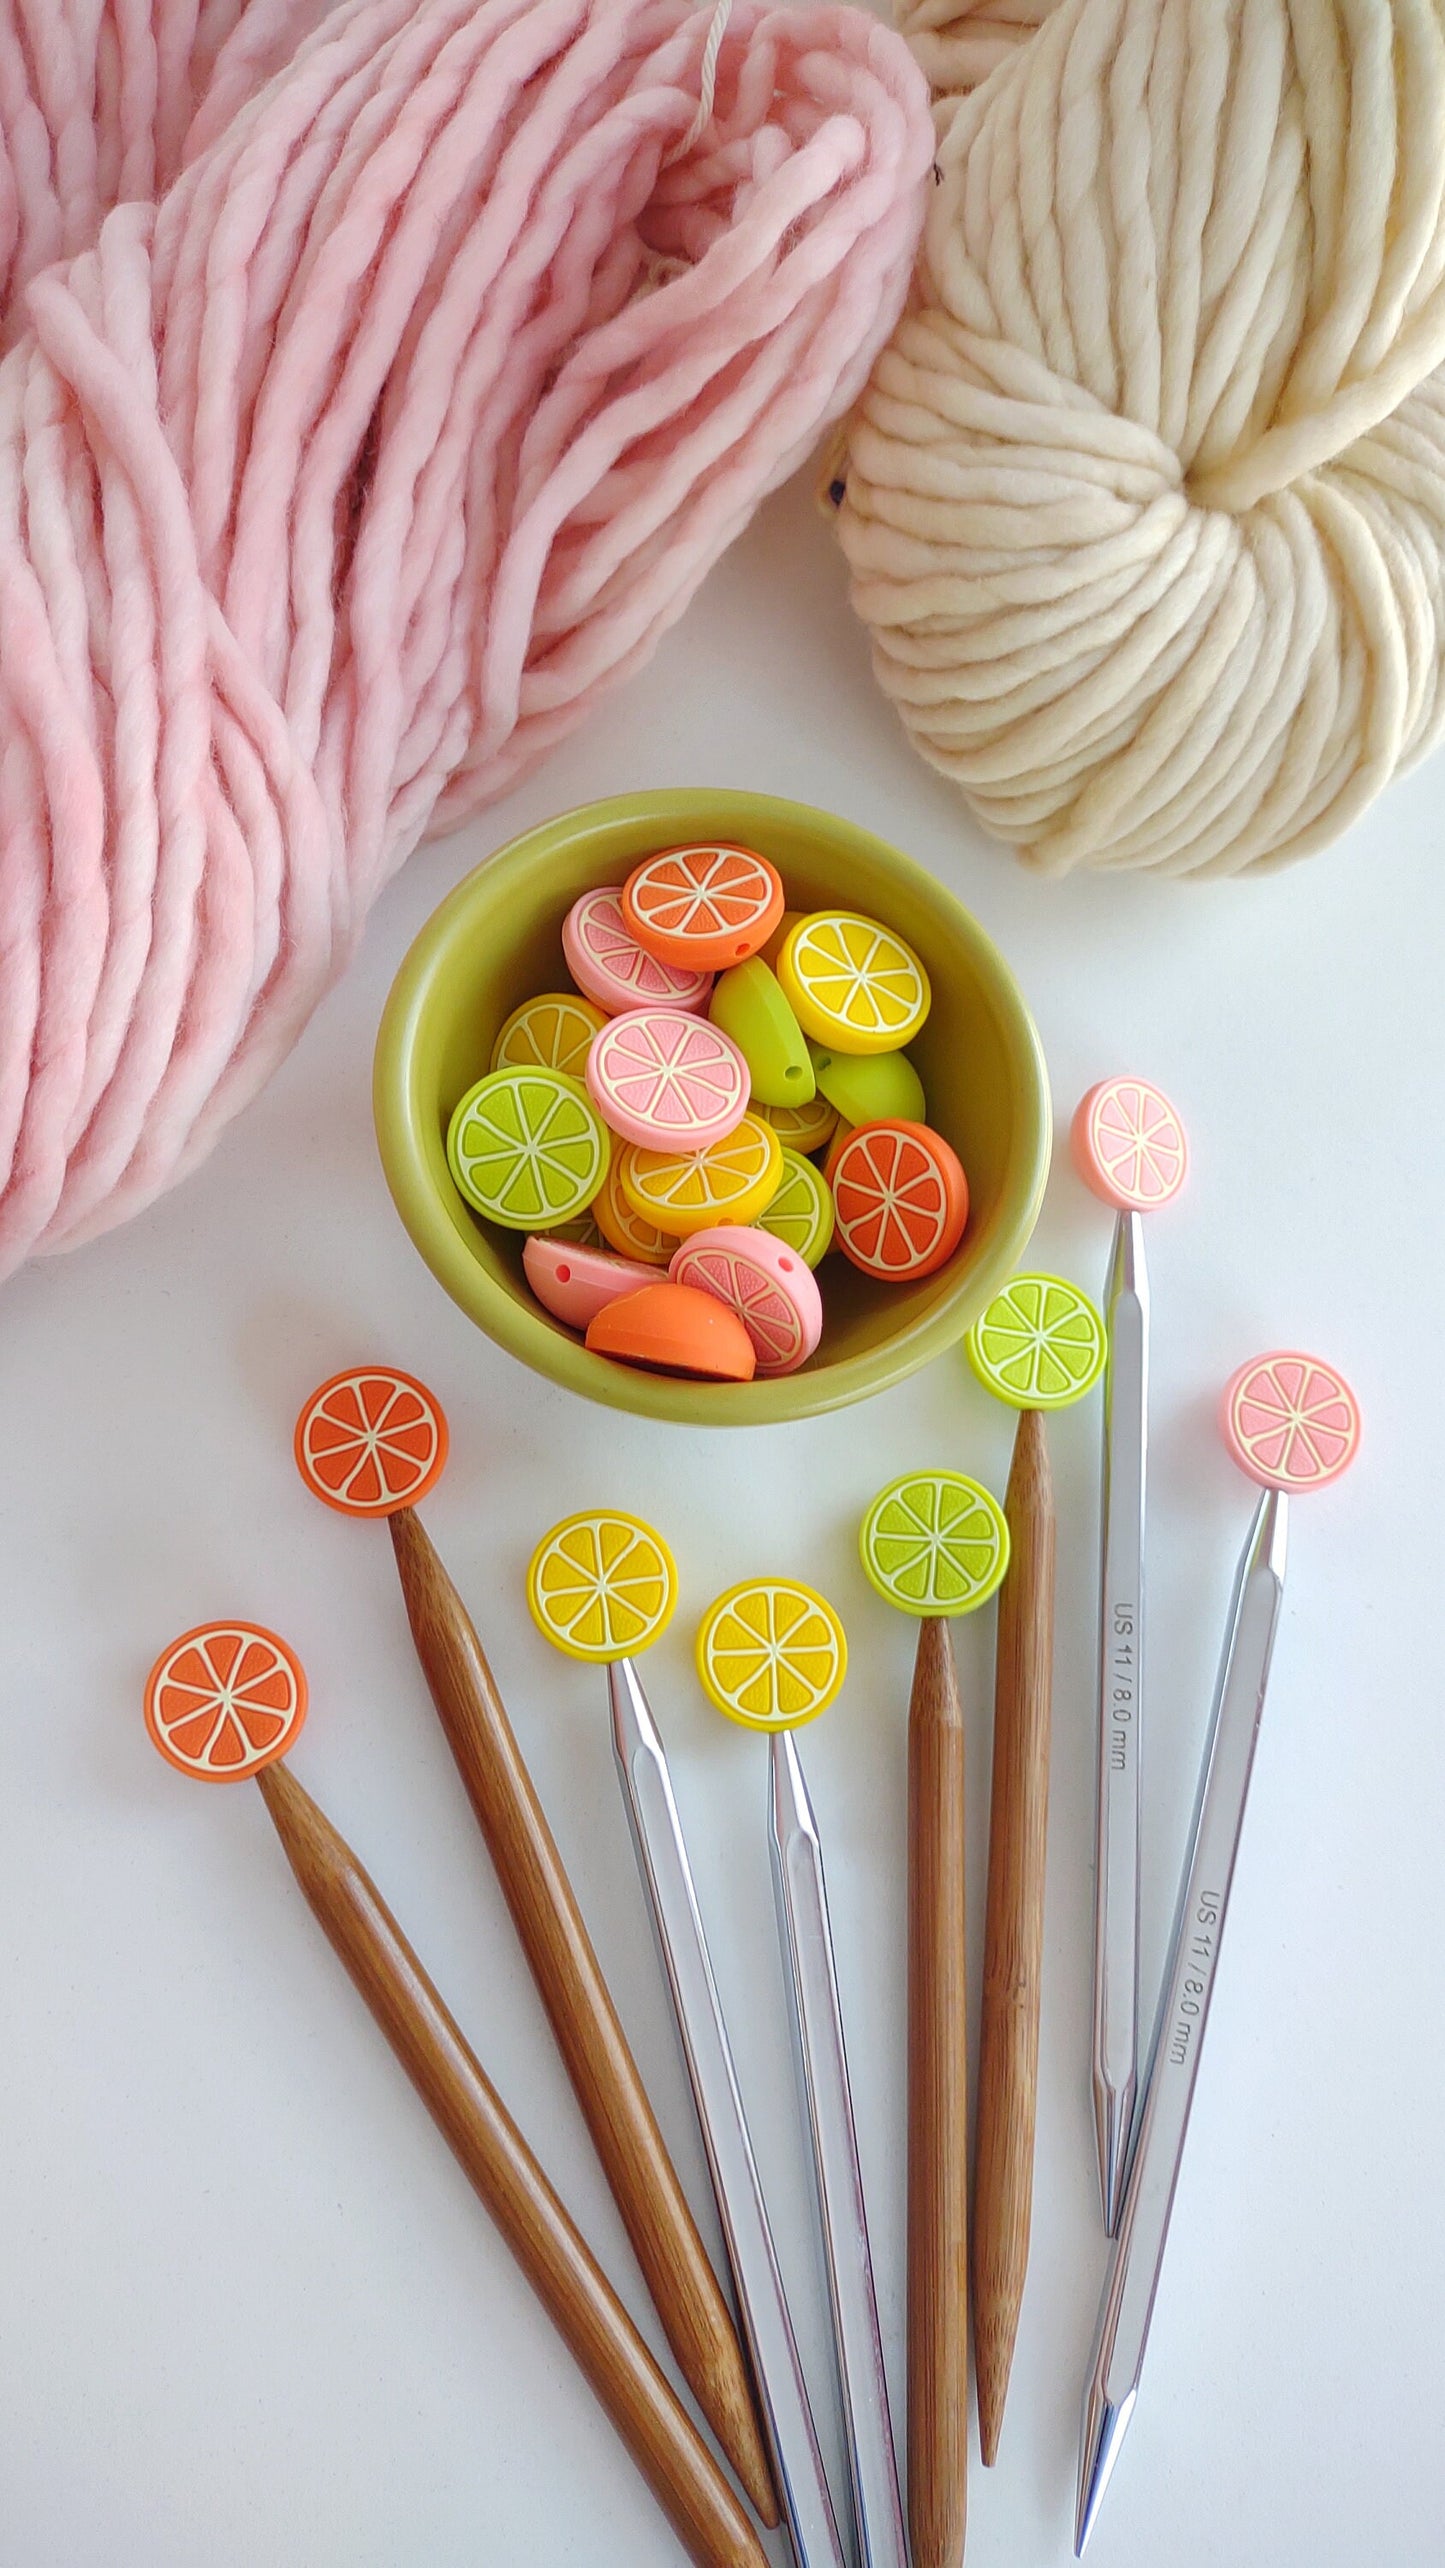 Orange Knitting Needle Stitch Stoppers. Needle Protectors. Knitting Needle Stoppers. Knitting Notions, Accessories, Supplies, Tools. Citrus